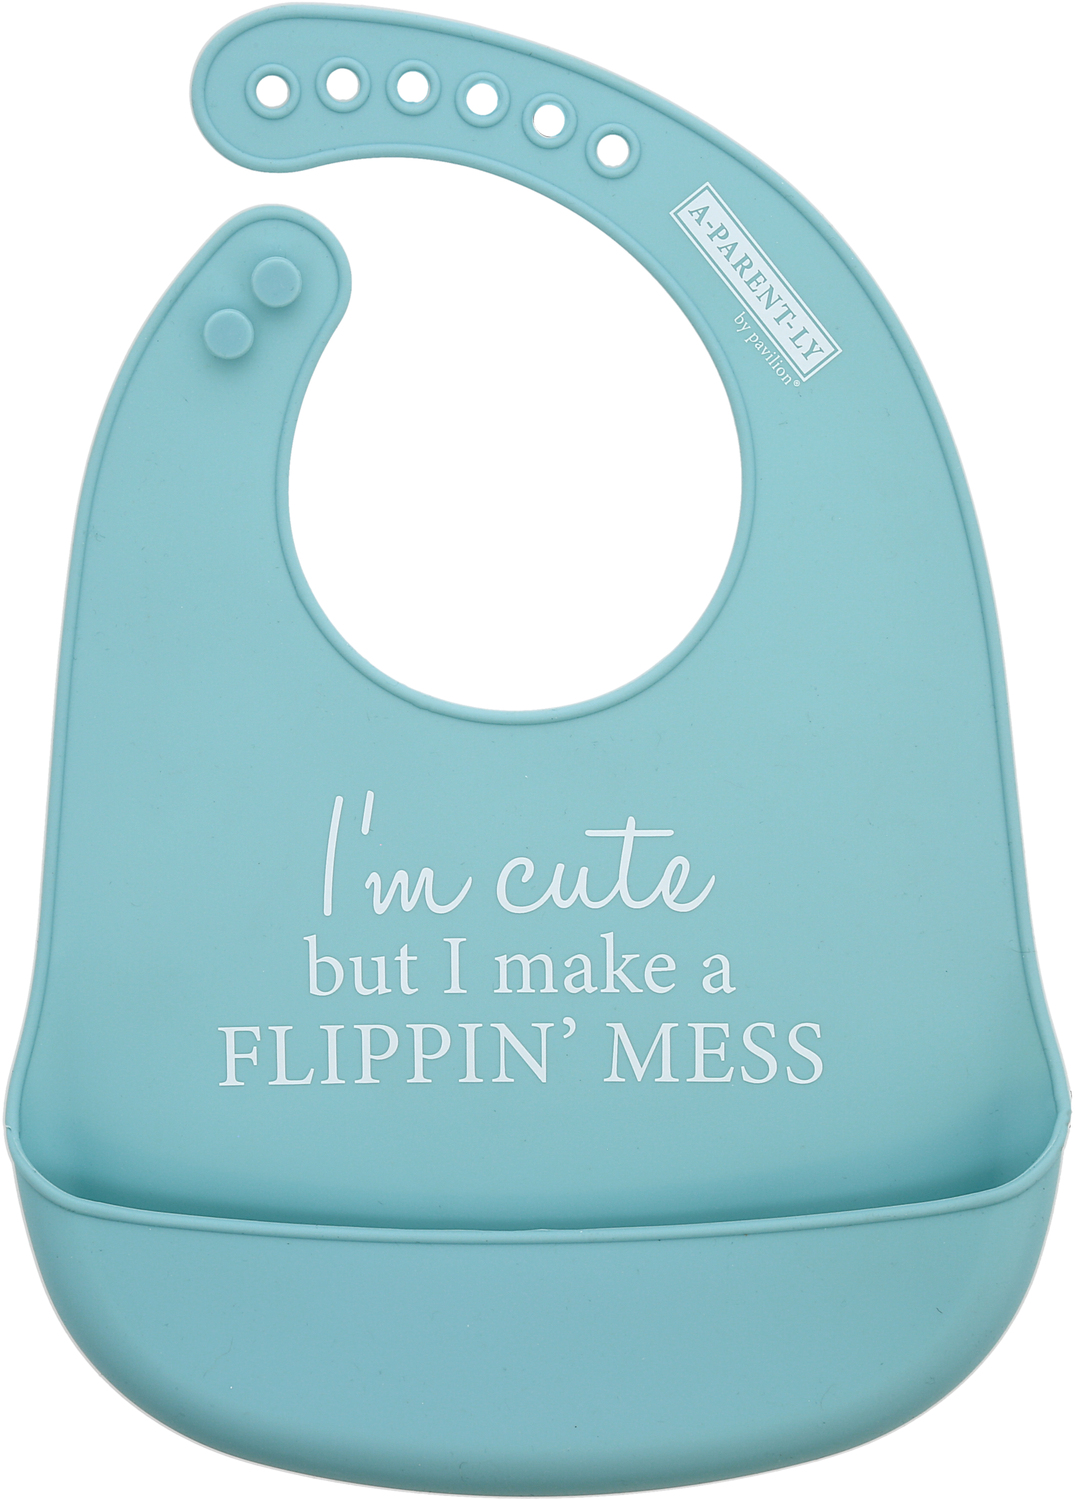 Flippin' Mess by A-Parent-ly - Flippin' Mess - 12" Silicone Catch All Bib